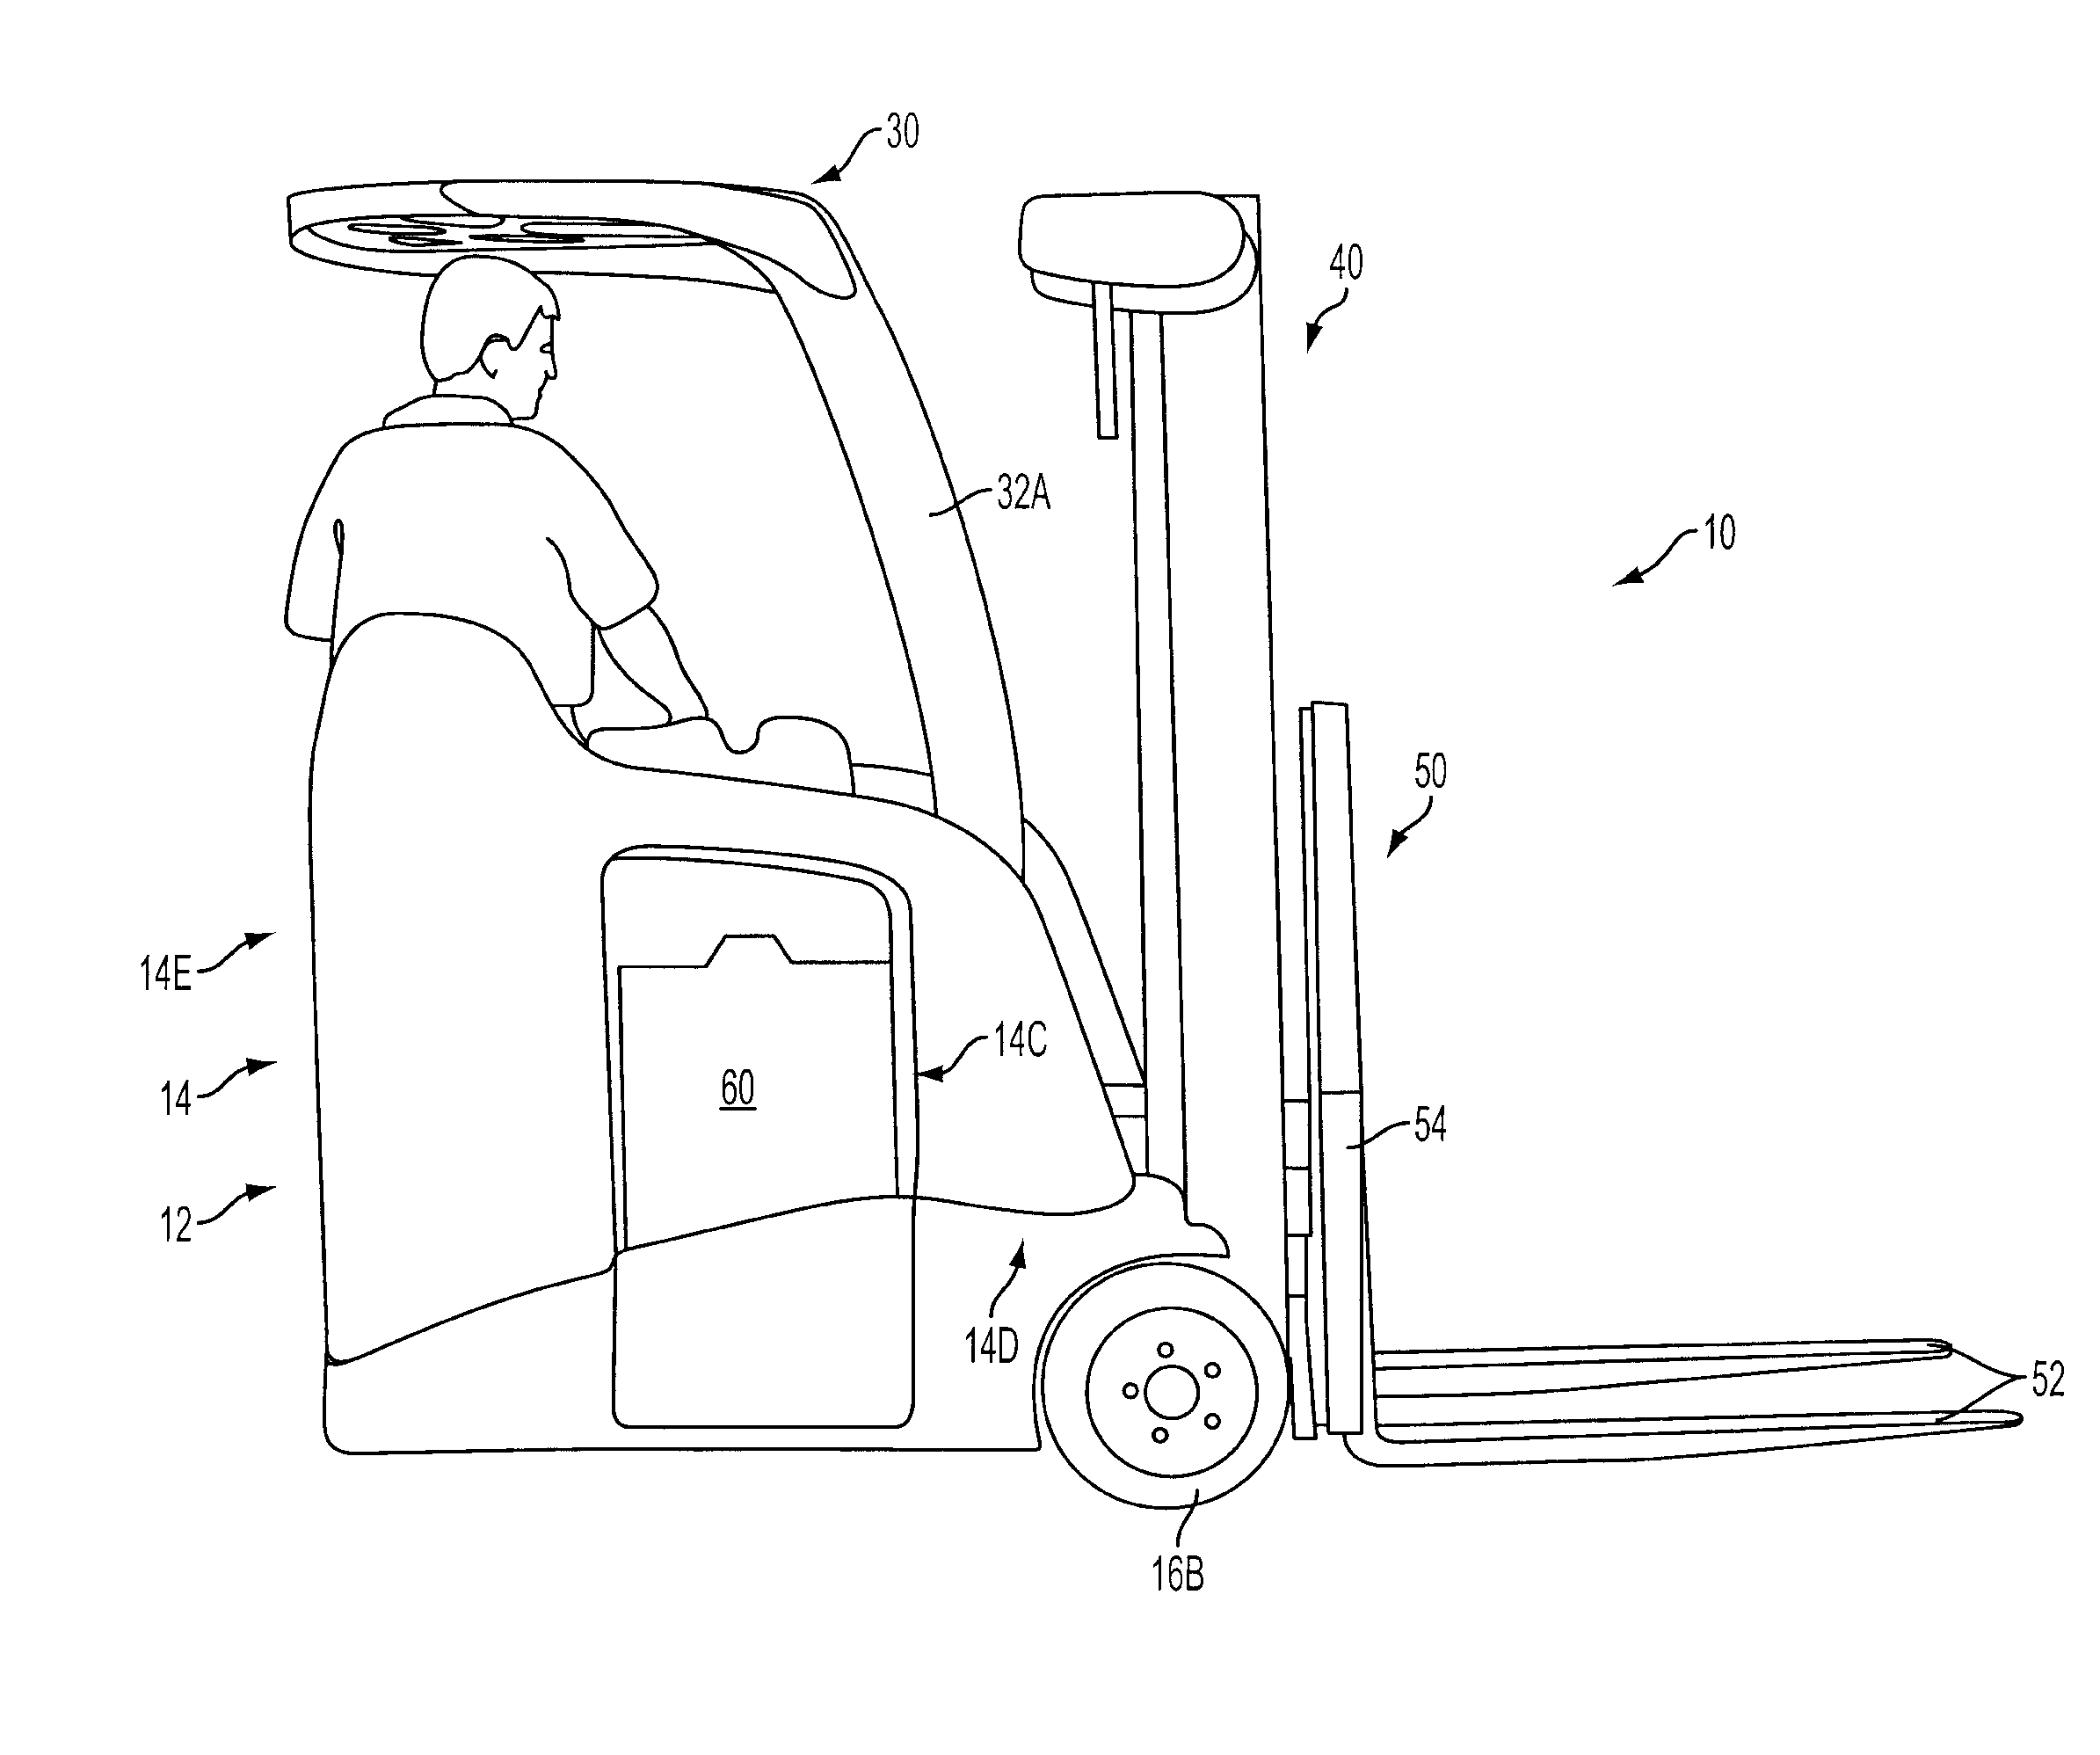 Materials handling vehicle having at least one controller coupled to a front wall of a frame